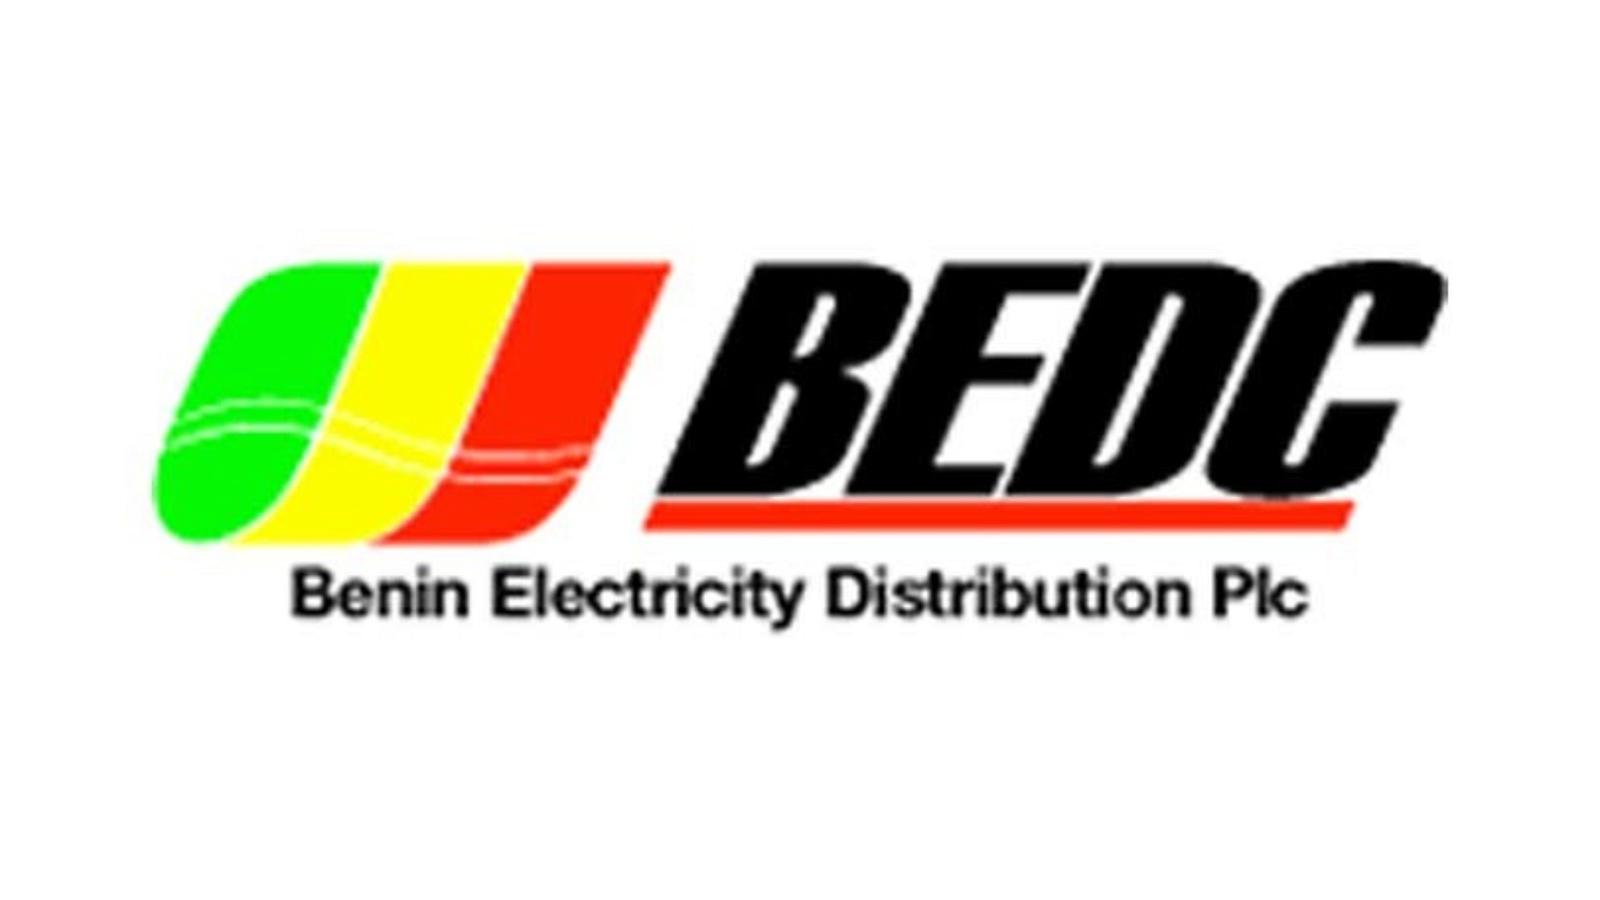 COVID-19: BEDC pledges 24-hour power to isolation centres in 4 states